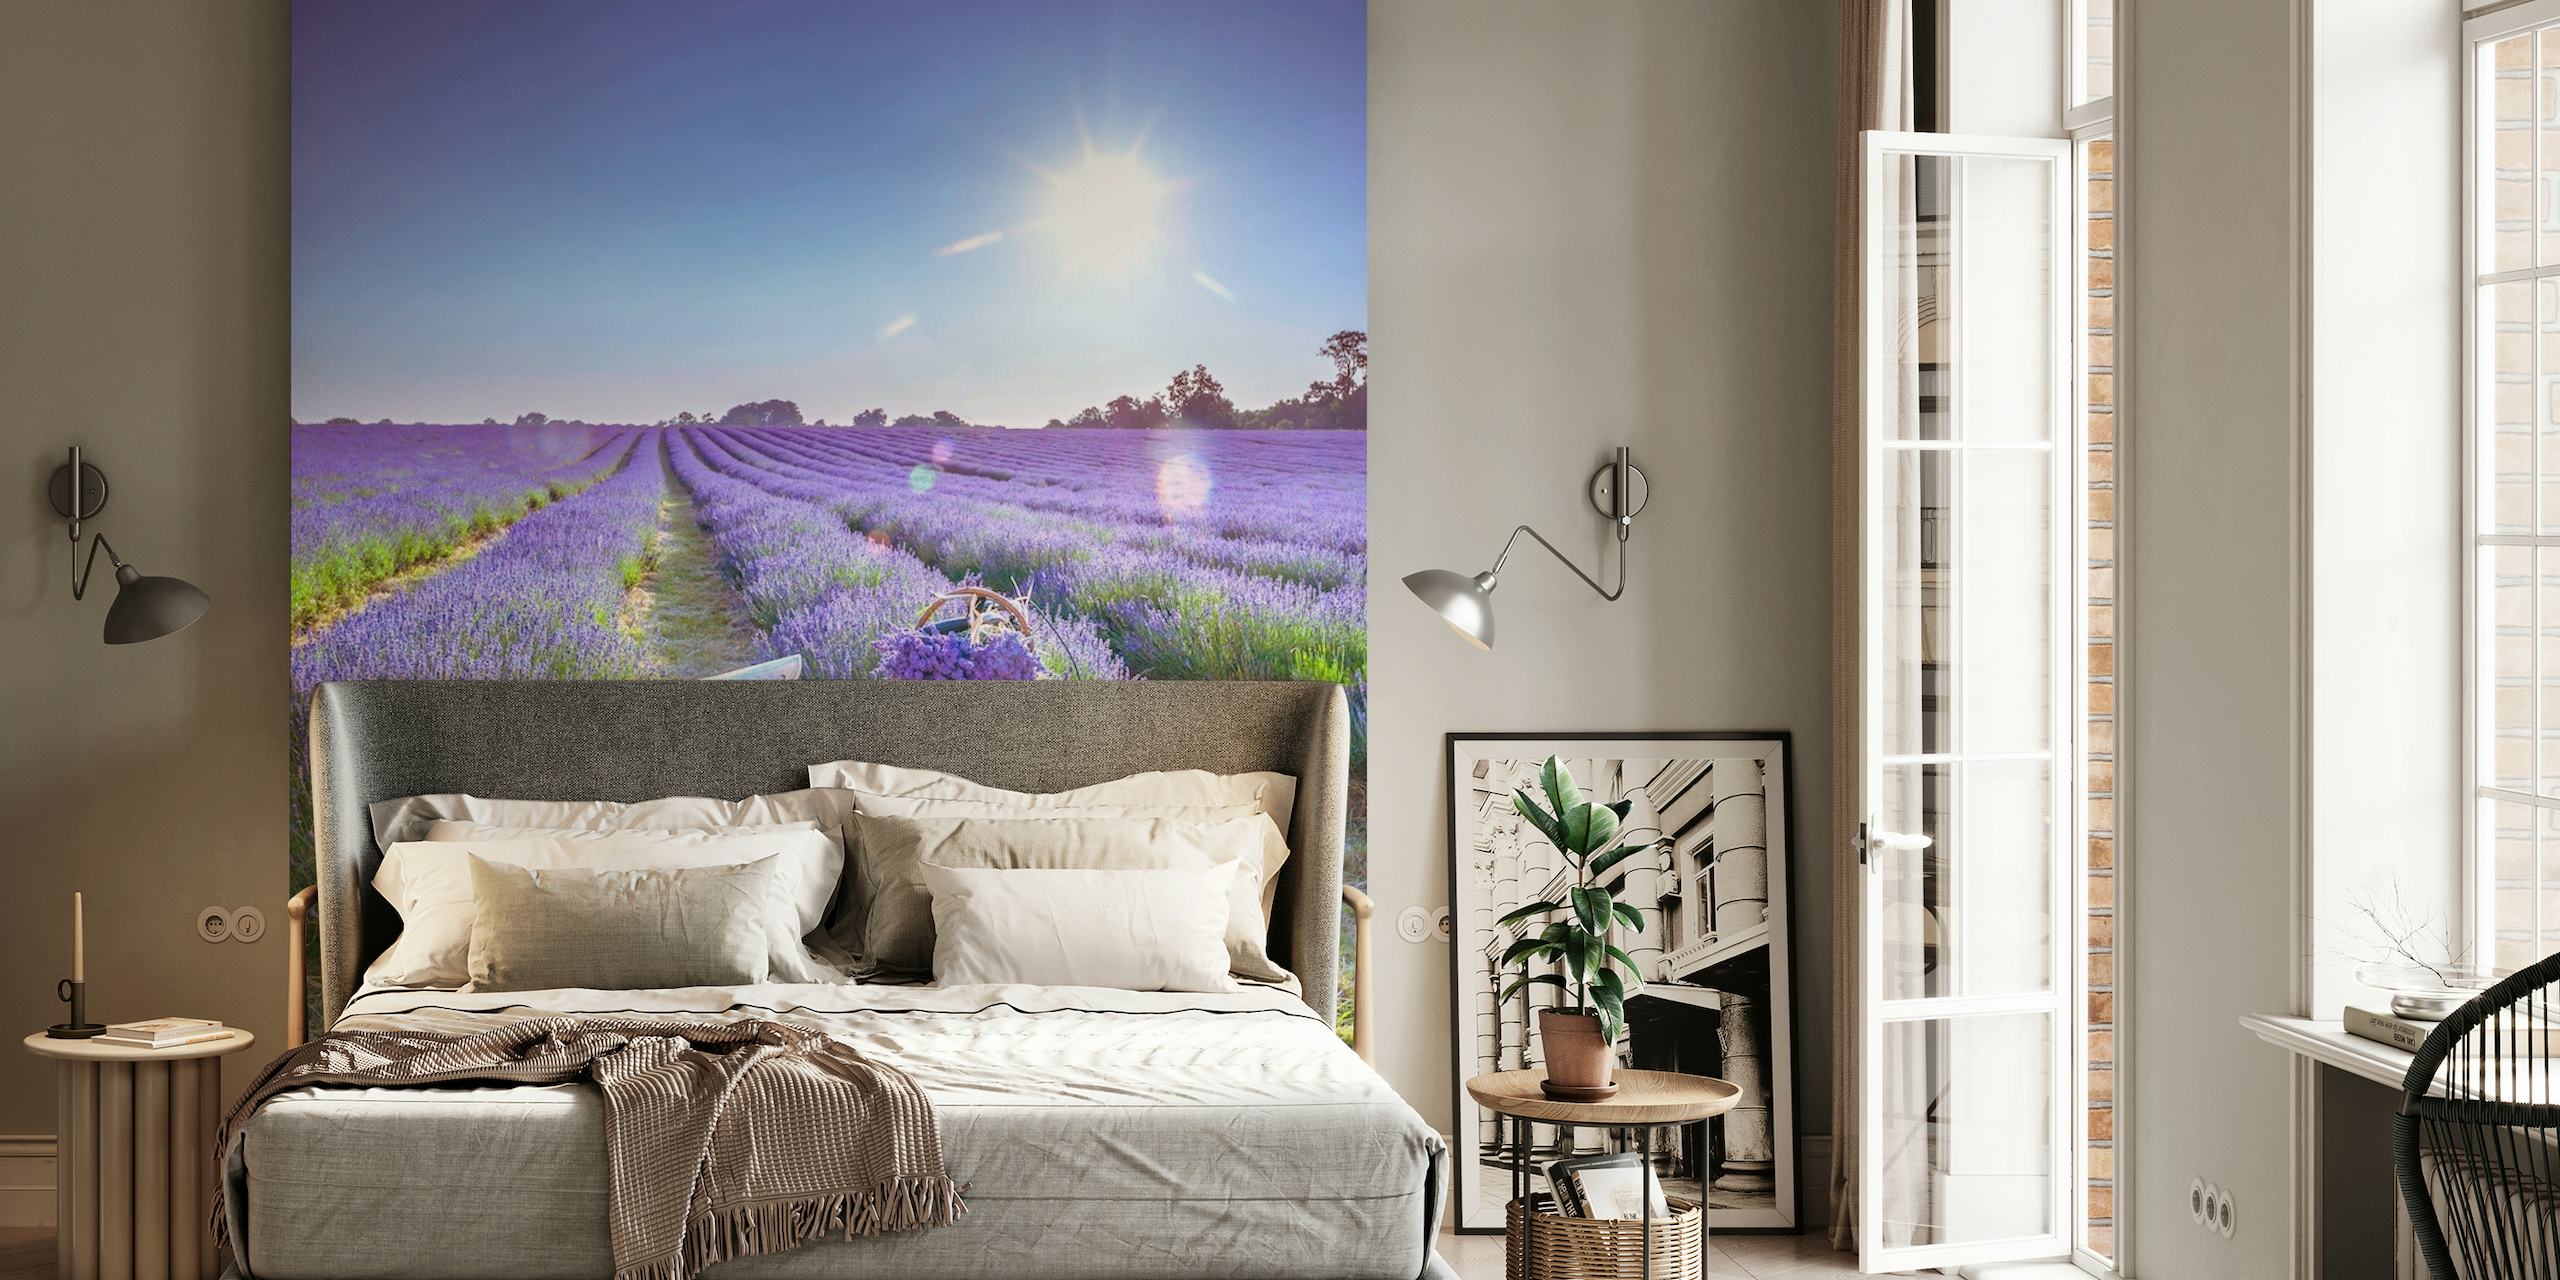 Bicycle with flowers in a Lavender field papel pintado